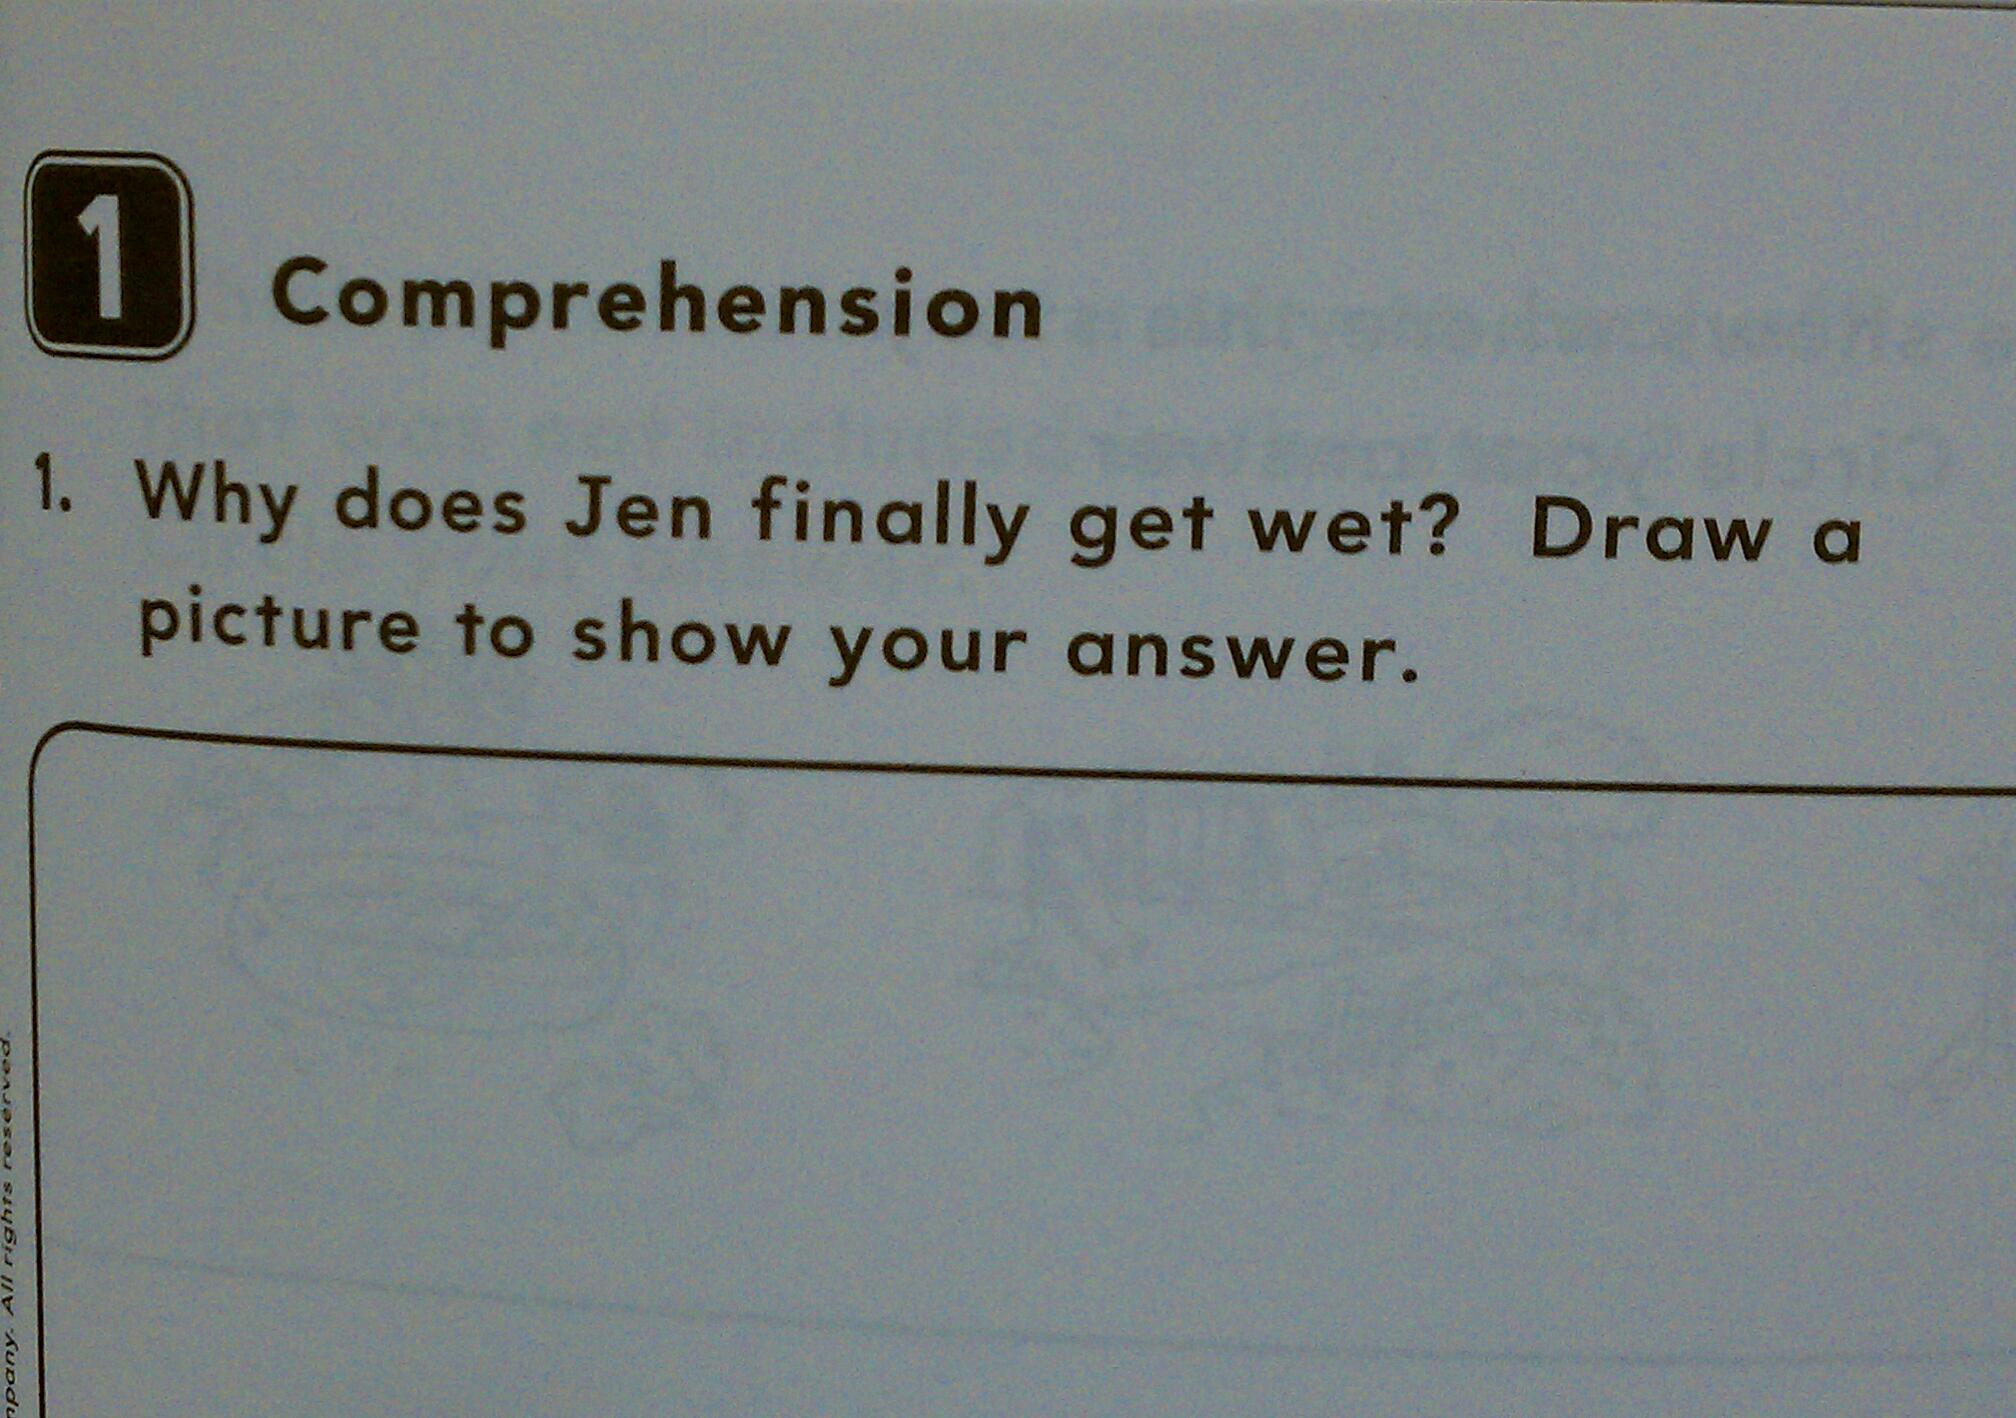 A problem from a co-workers' 5 year-old son's school workbook. Appropriate or not?